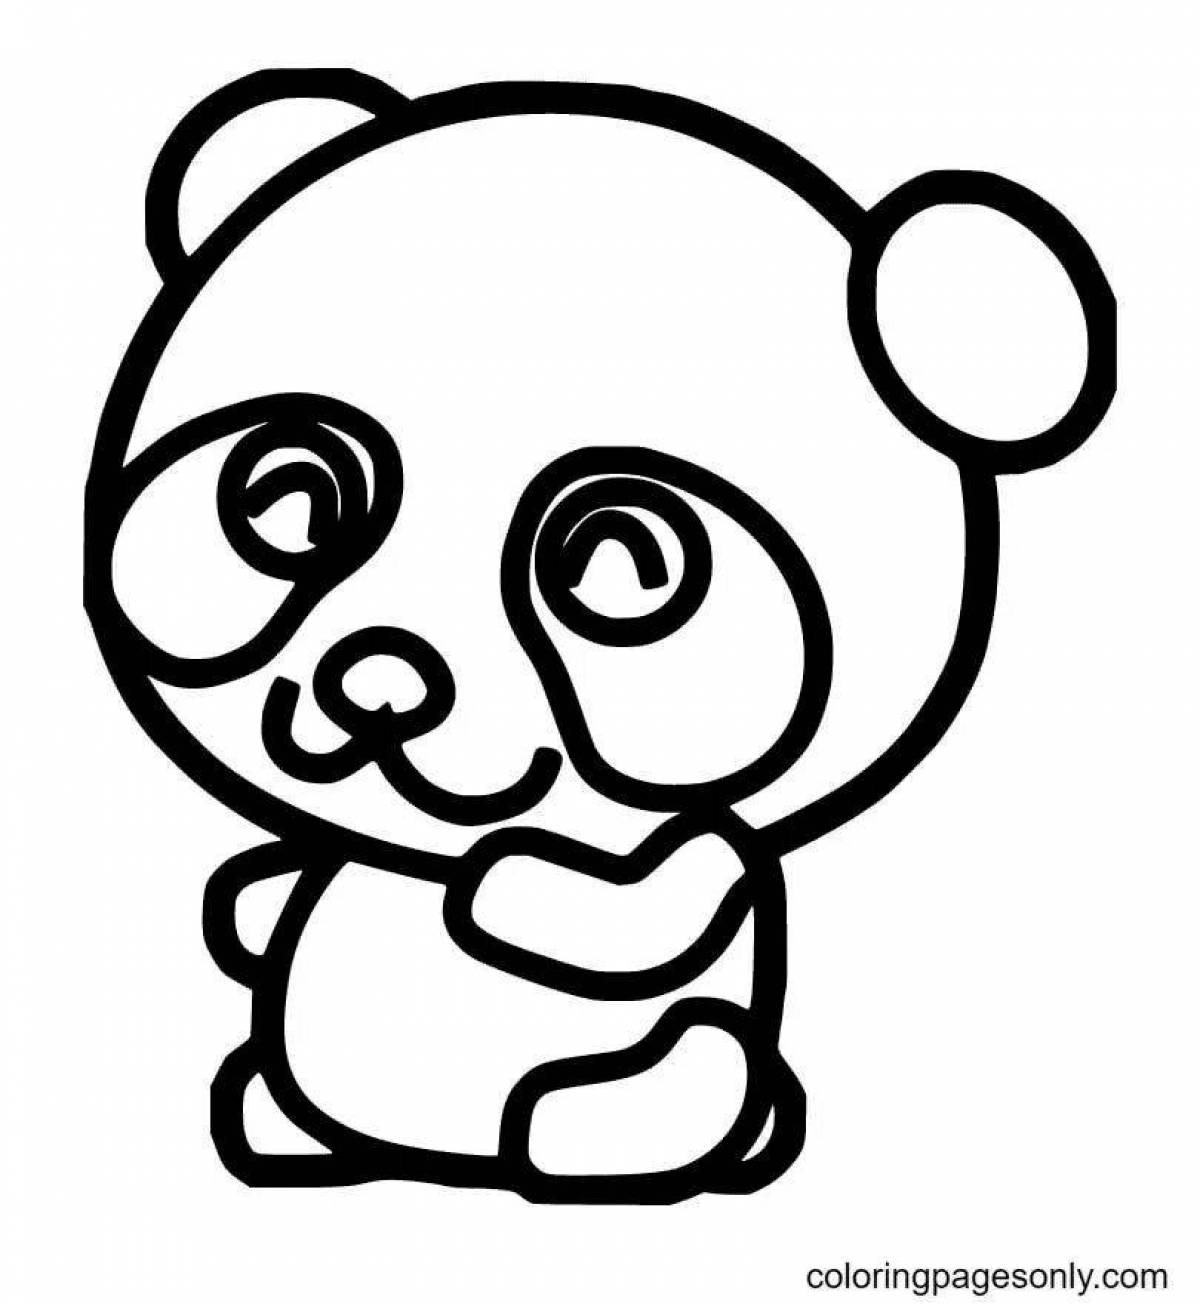 Cute panda giggling coloring page